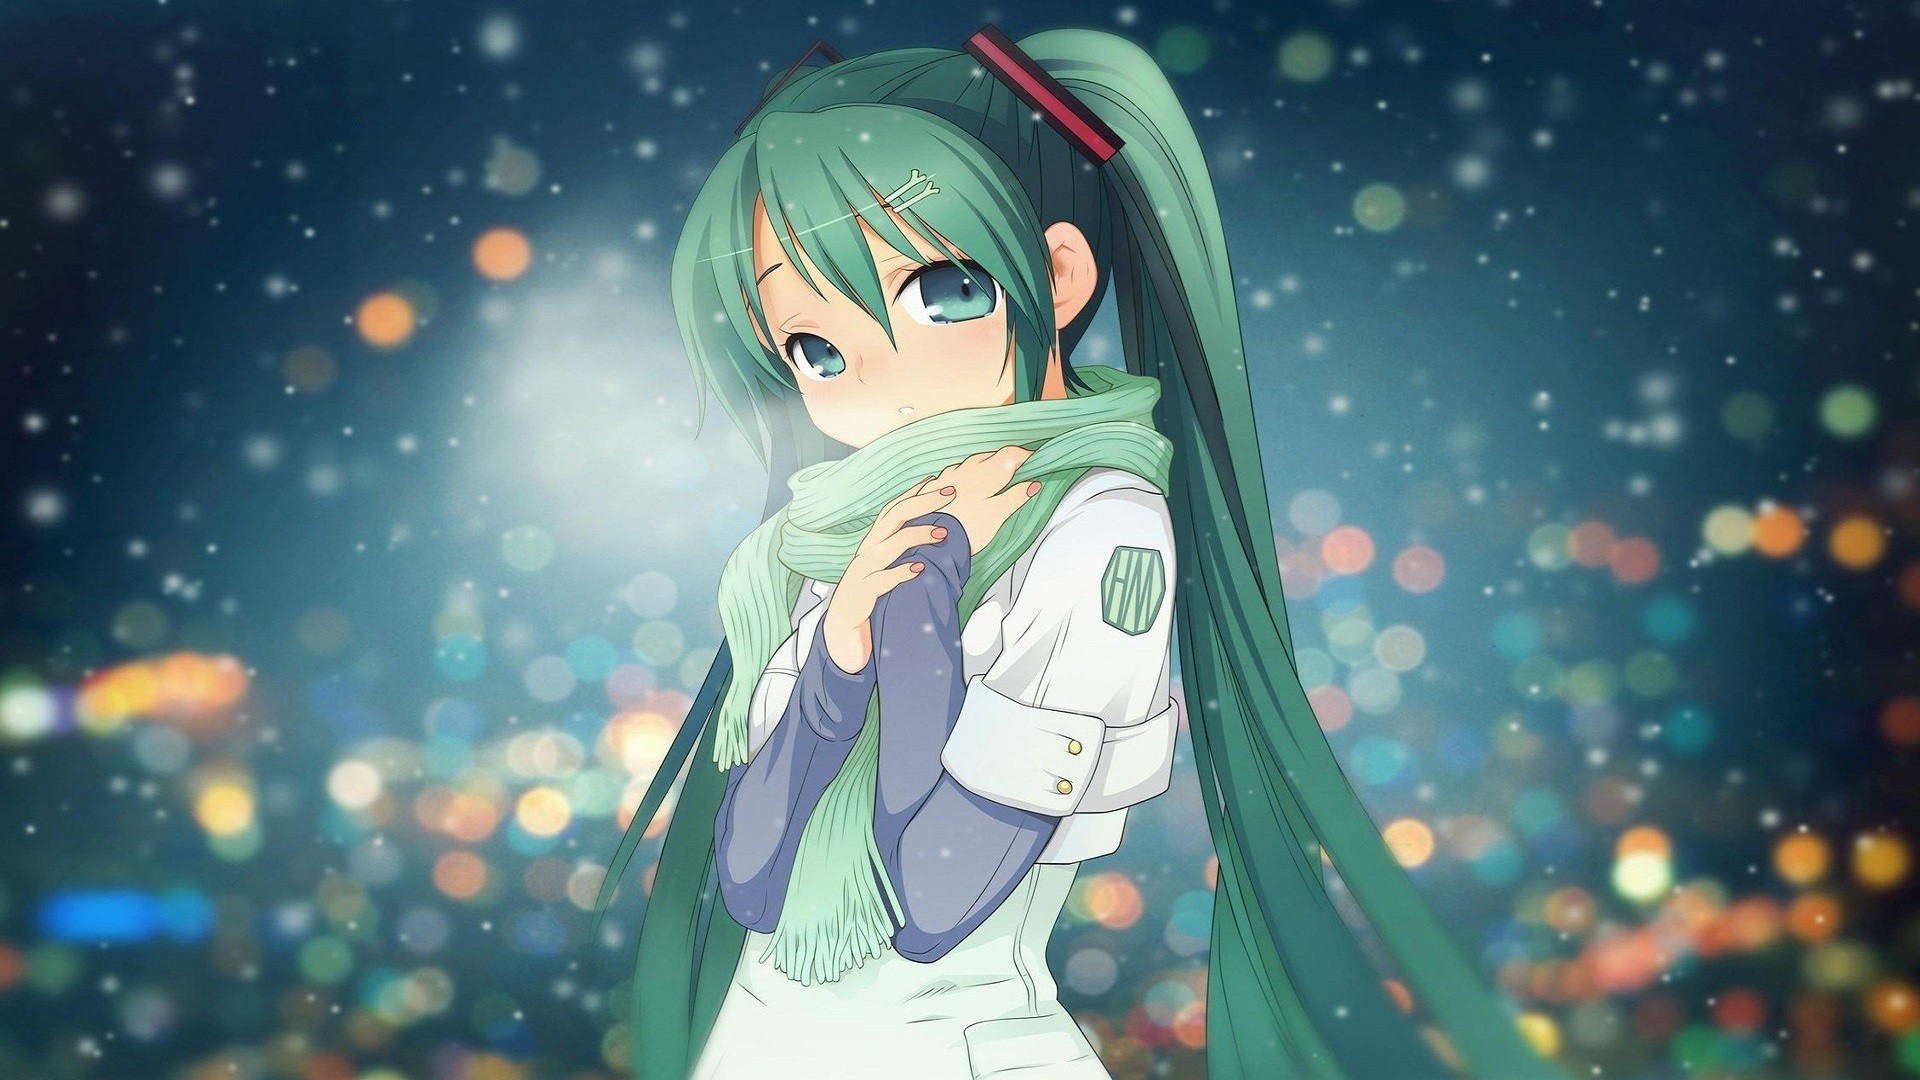 Anime 1920x1080 anime girls anime Vocaloid Hatsune Miku blue eyes painted nails looking at viewer long hair green hair